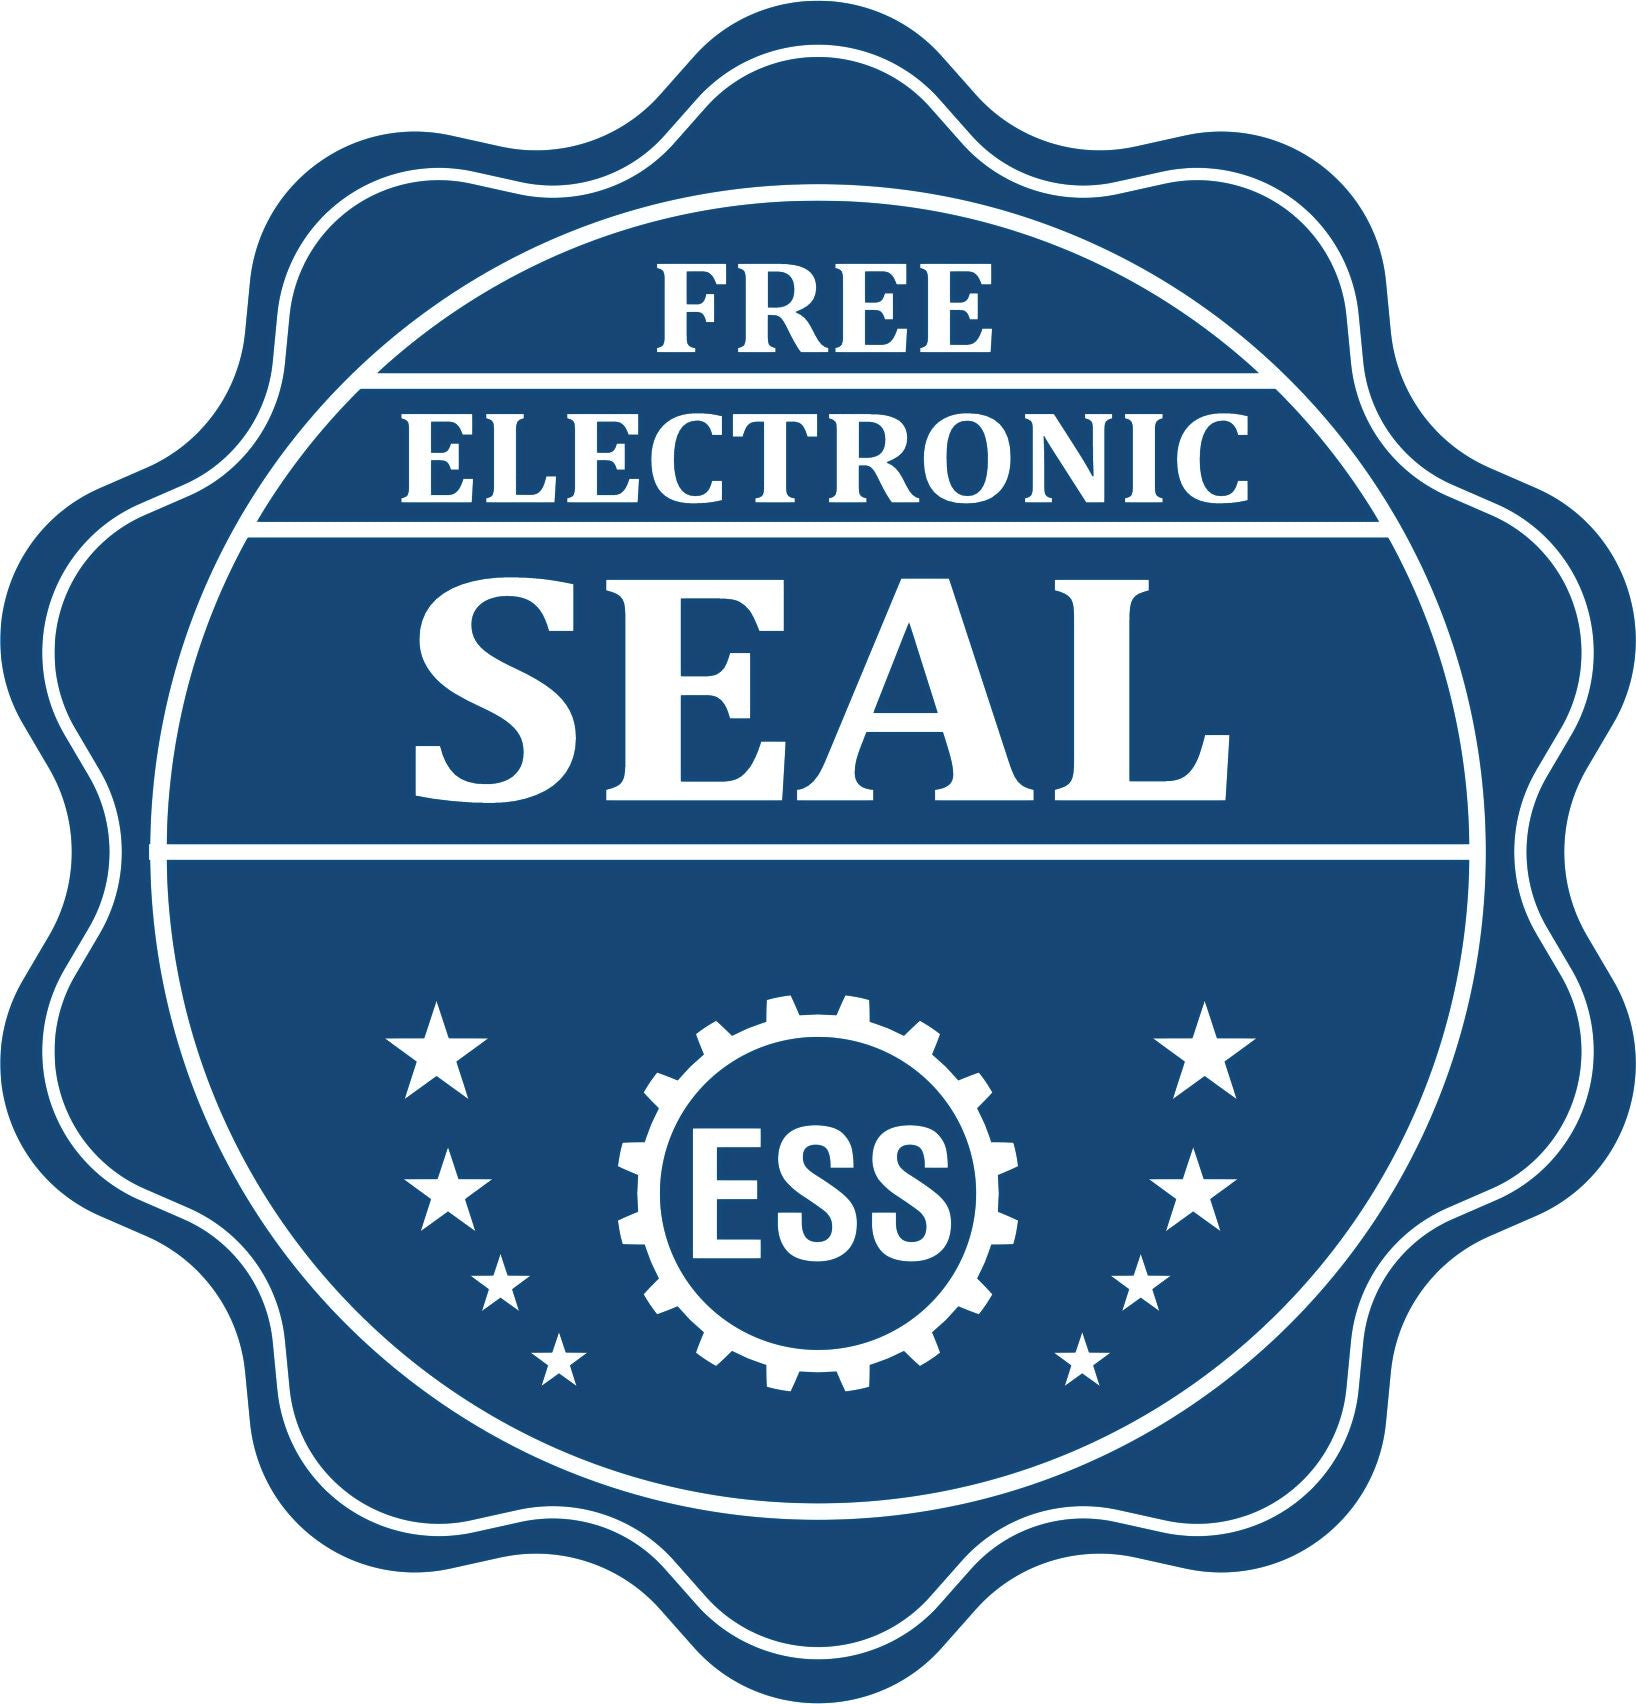 A badge showing a free electronic seal for the Heavy Duty Cast Iron New Mexico Architect Embosser with stars and the ESS gear on the emblem.